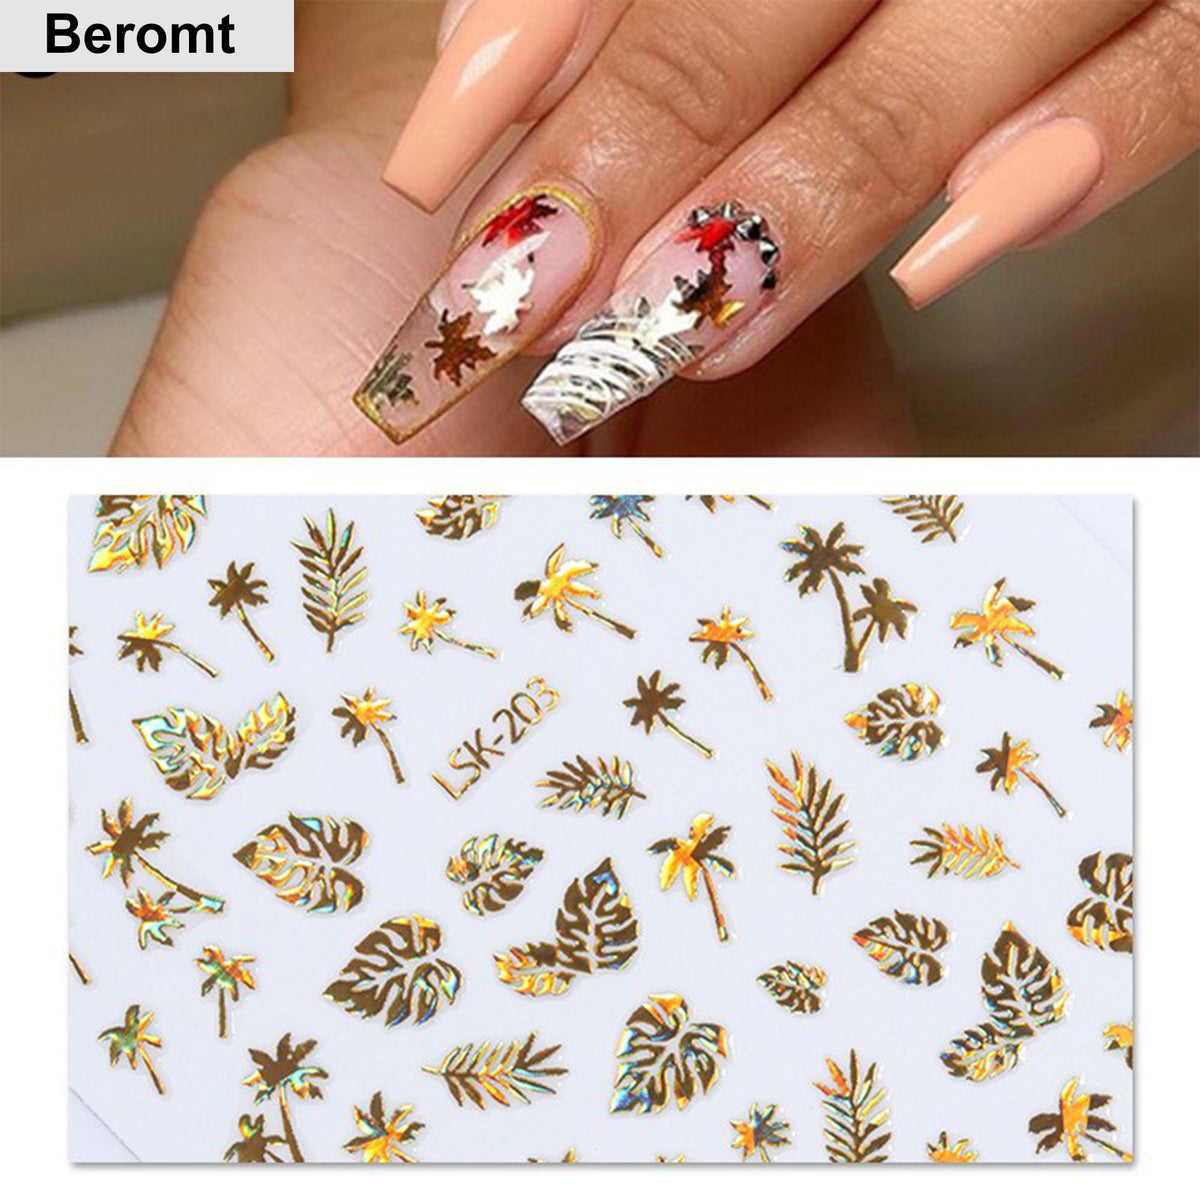 Rantoo 60 Pieces Nail Art Stickers DIY Nail Decals 3D Safty and nontoxic  Colorful Nail Stickers for Nails Design Manicure Tips Decor : Amazon.in:  Beauty